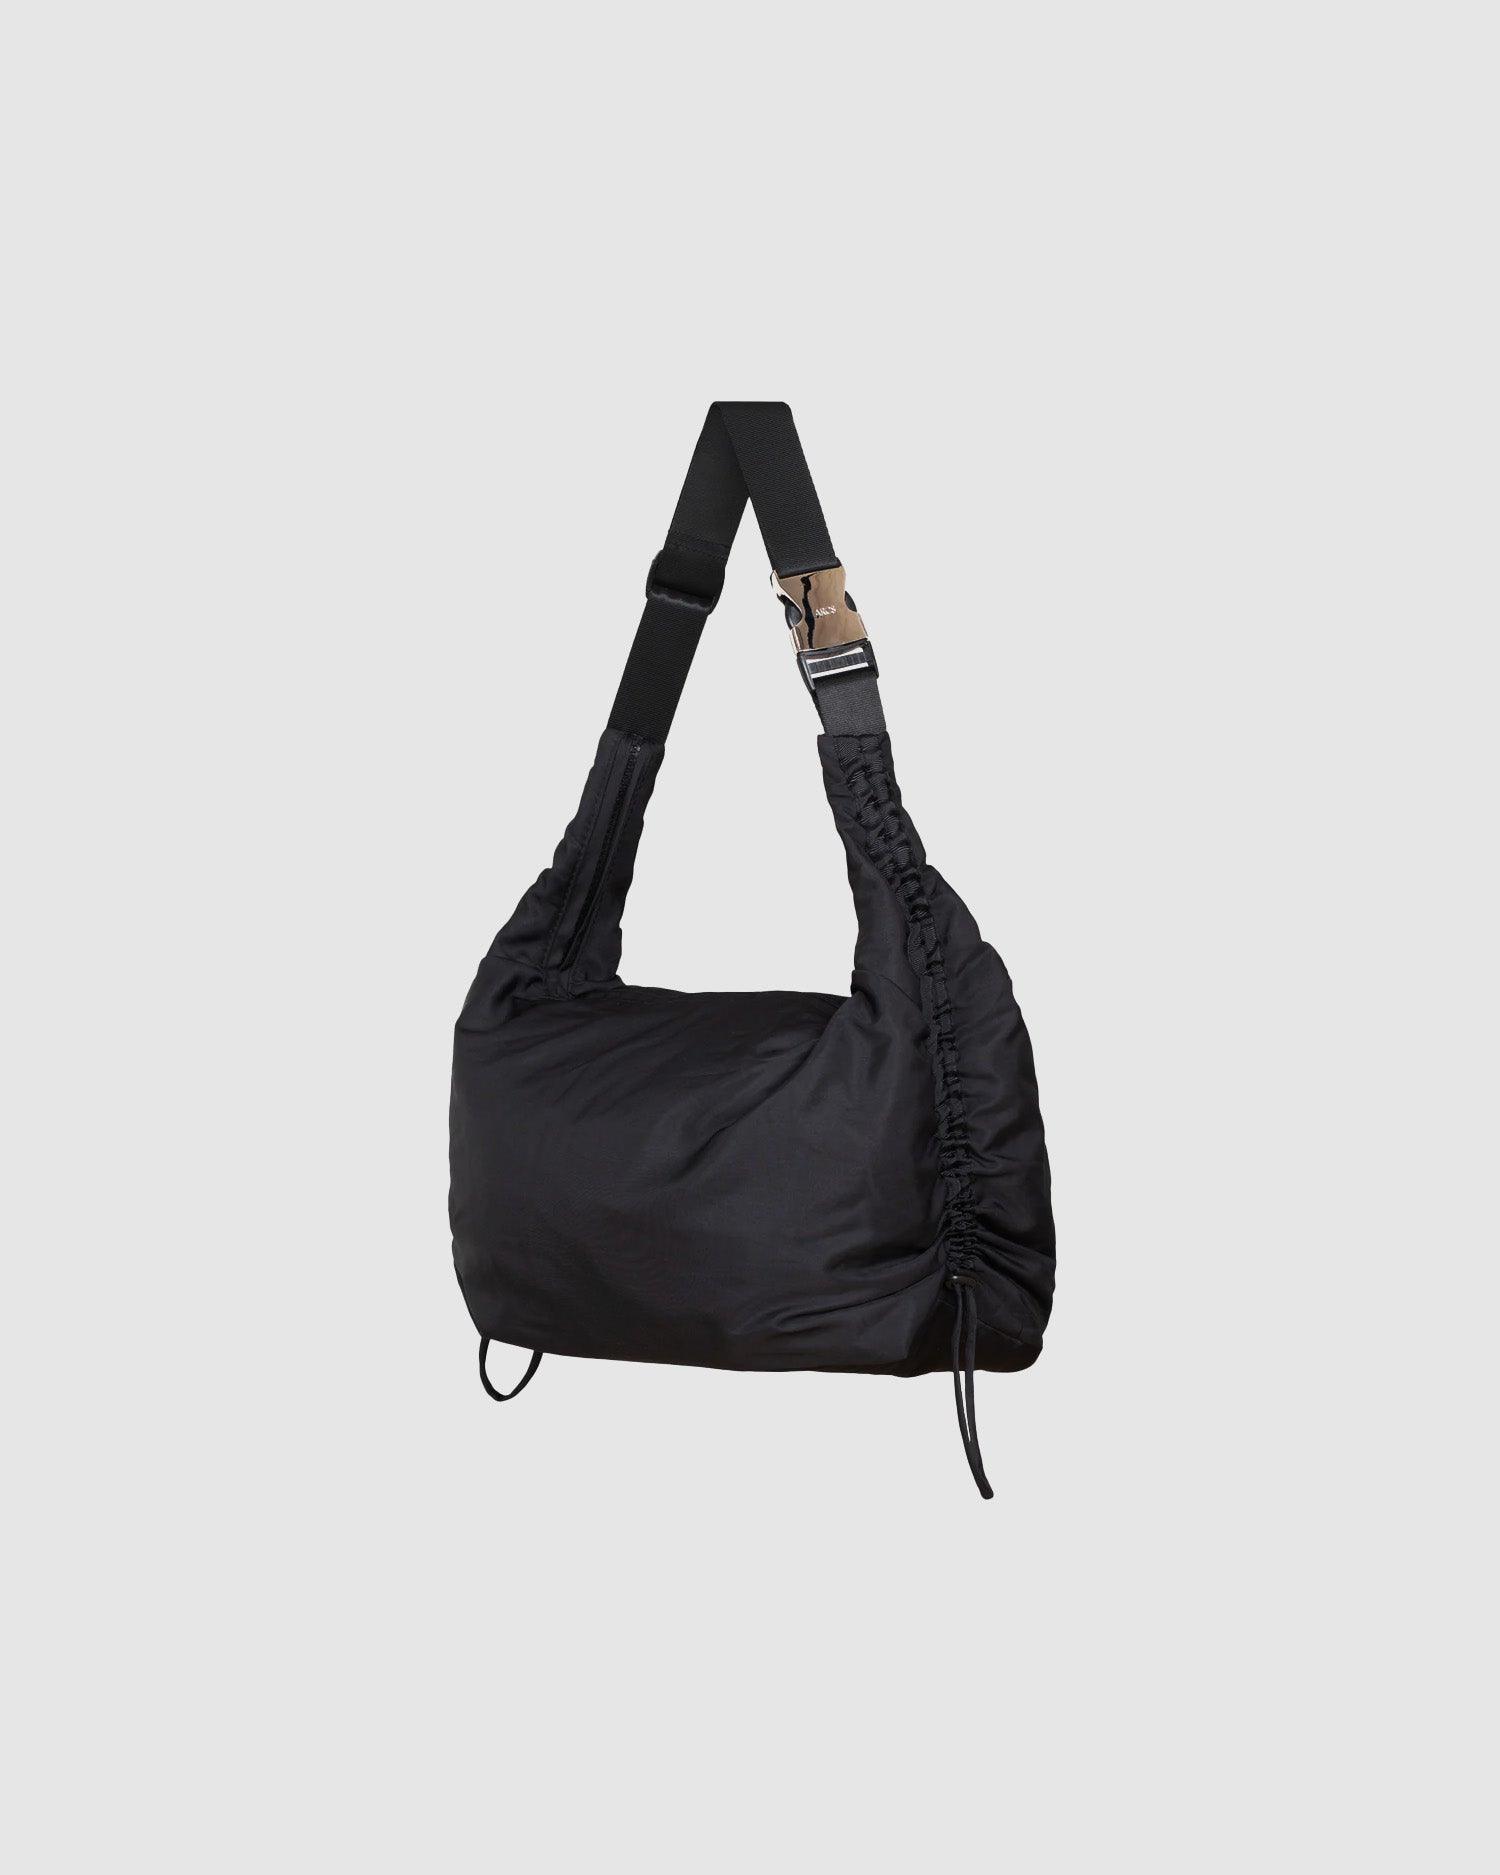 Little Hey Sling Bag Black - {{ collection.title }} - Chinatown Country Club 